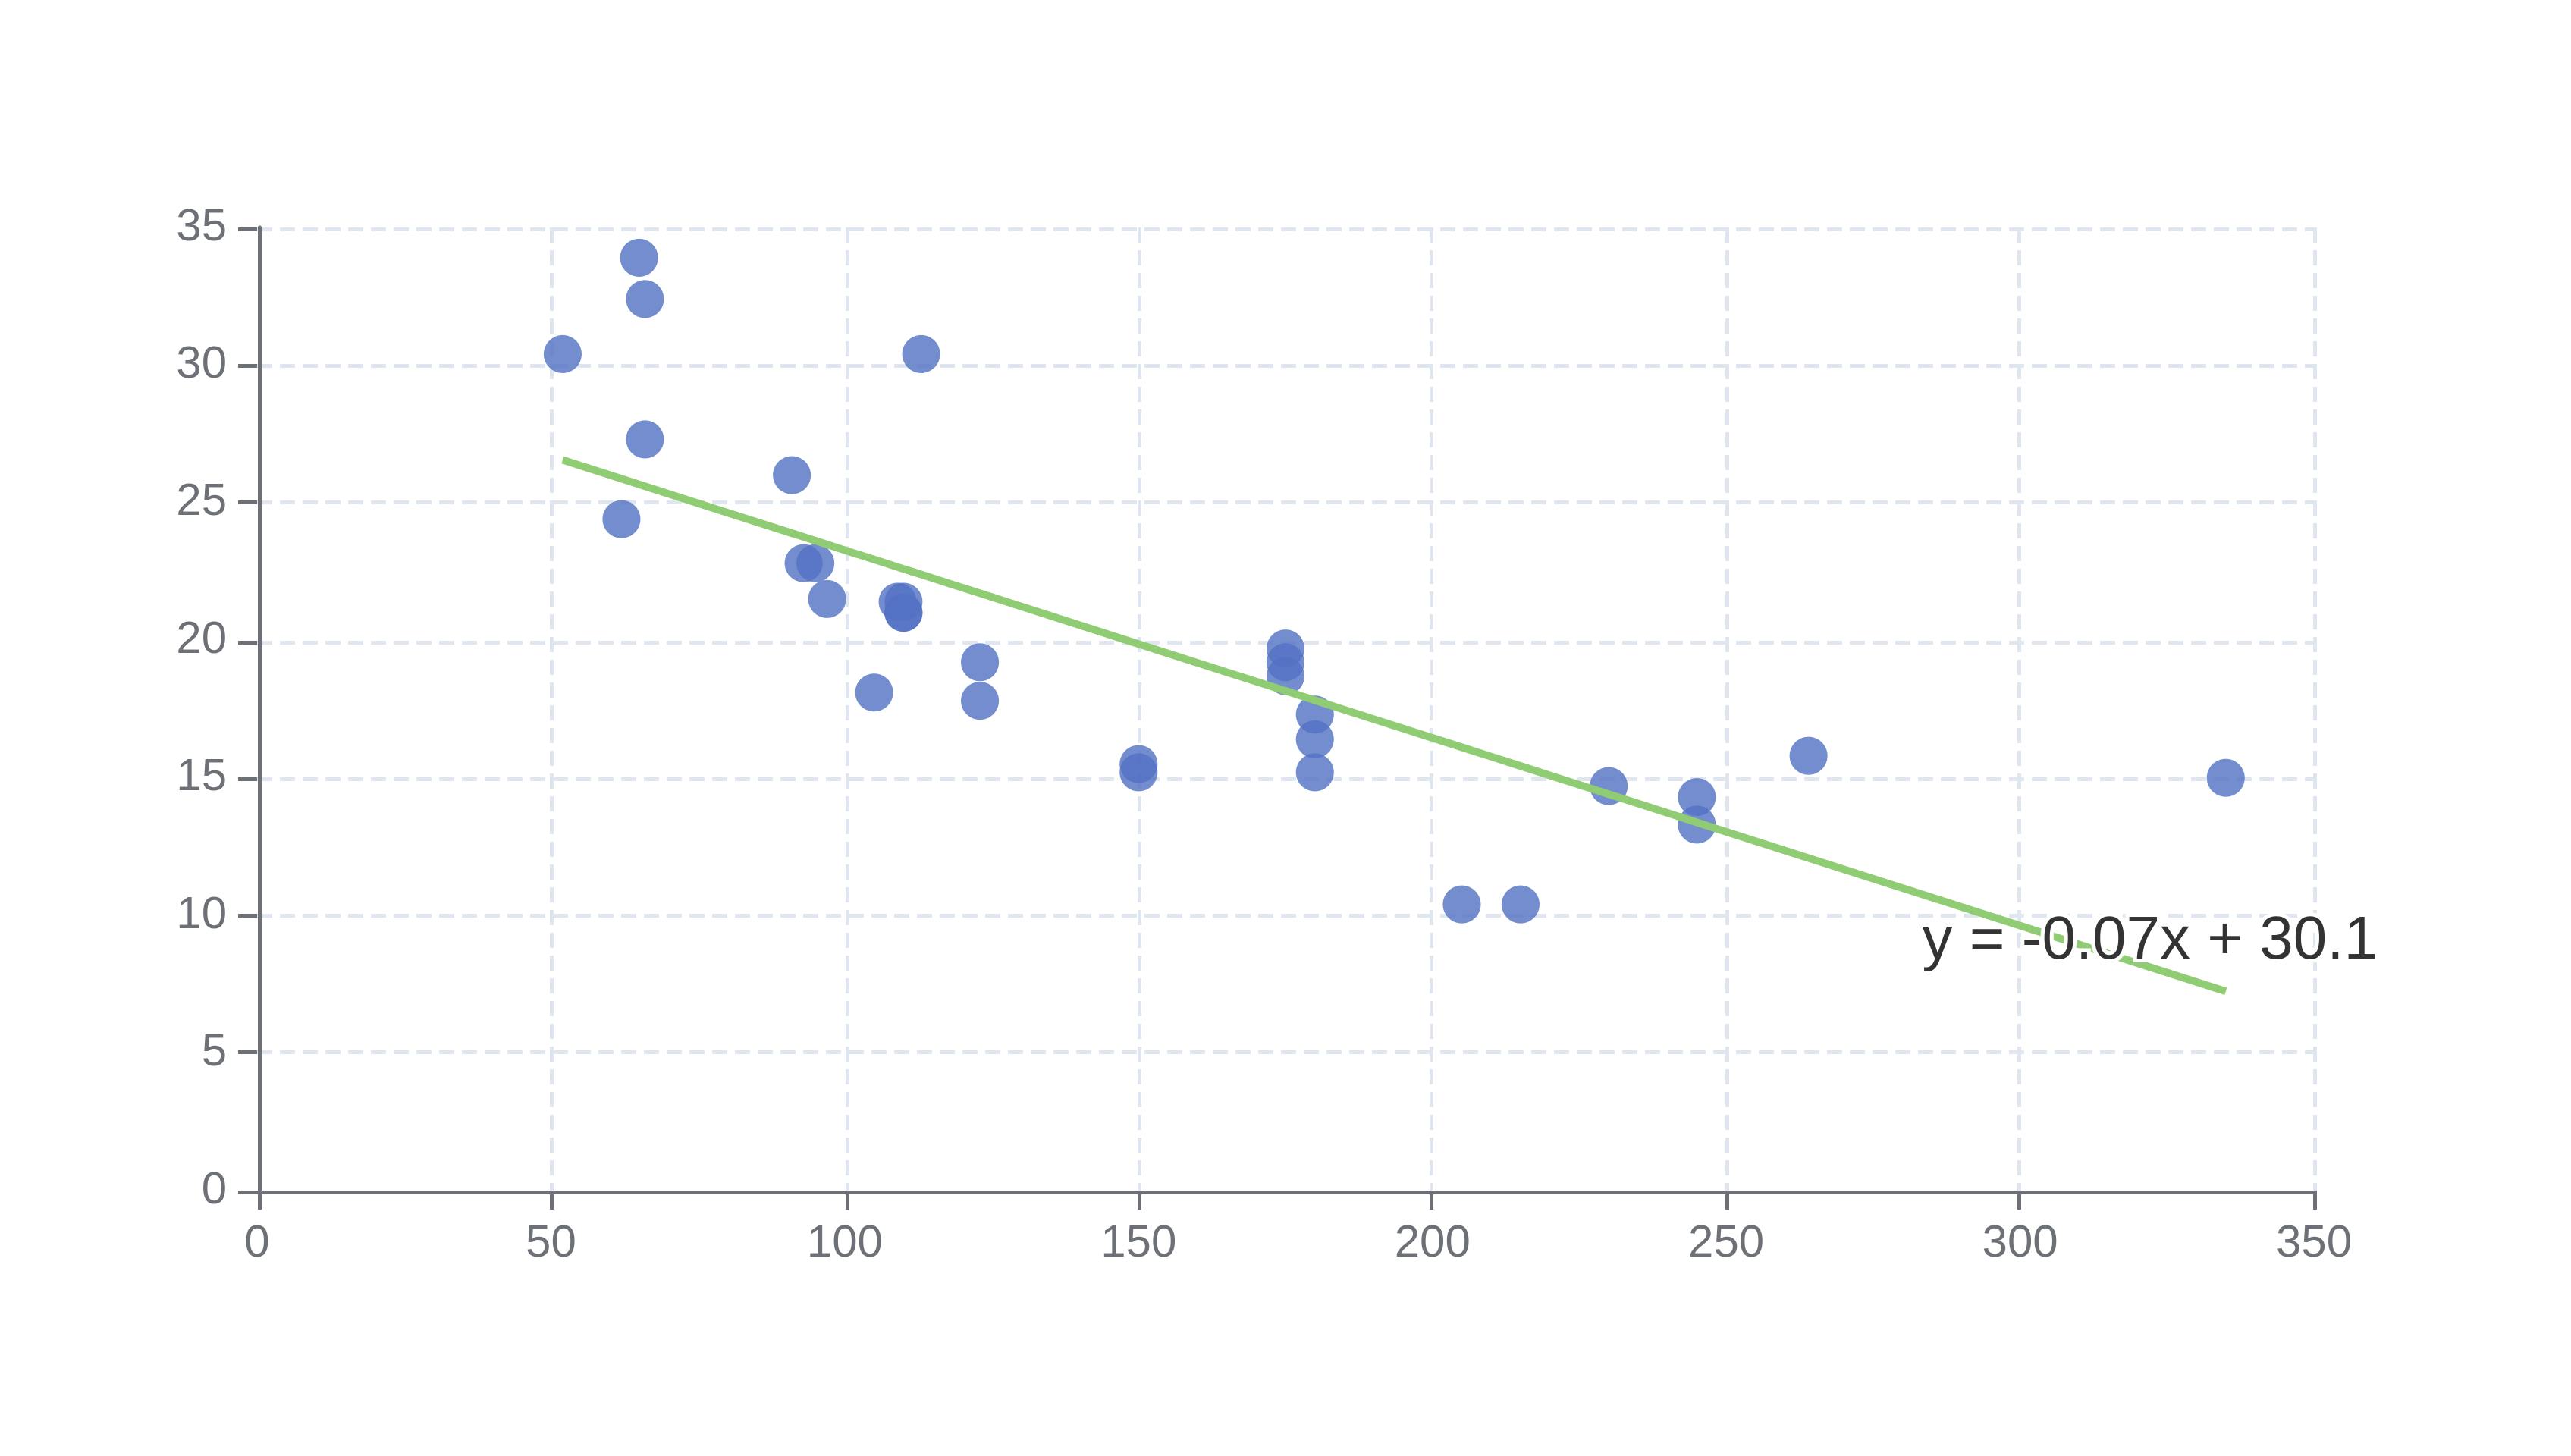 First order linear regression fit.